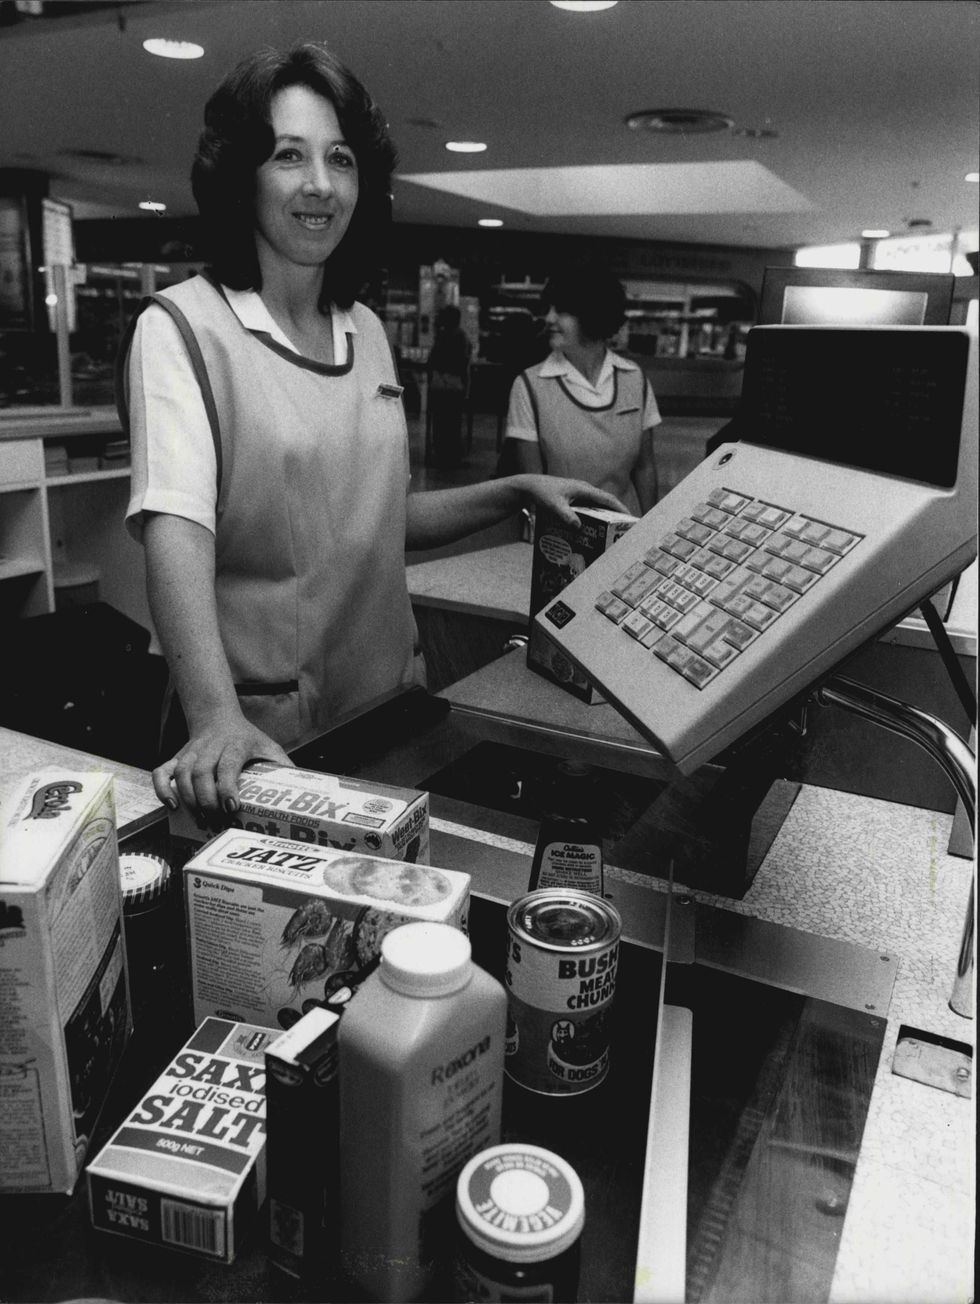 the new computerized supermarket scanning system which will be introduced into a number of australian shops and supermarkets in the next few years it is hoped it means a faster and better service for shopperswoolworths checkout girl dianne haggerston of